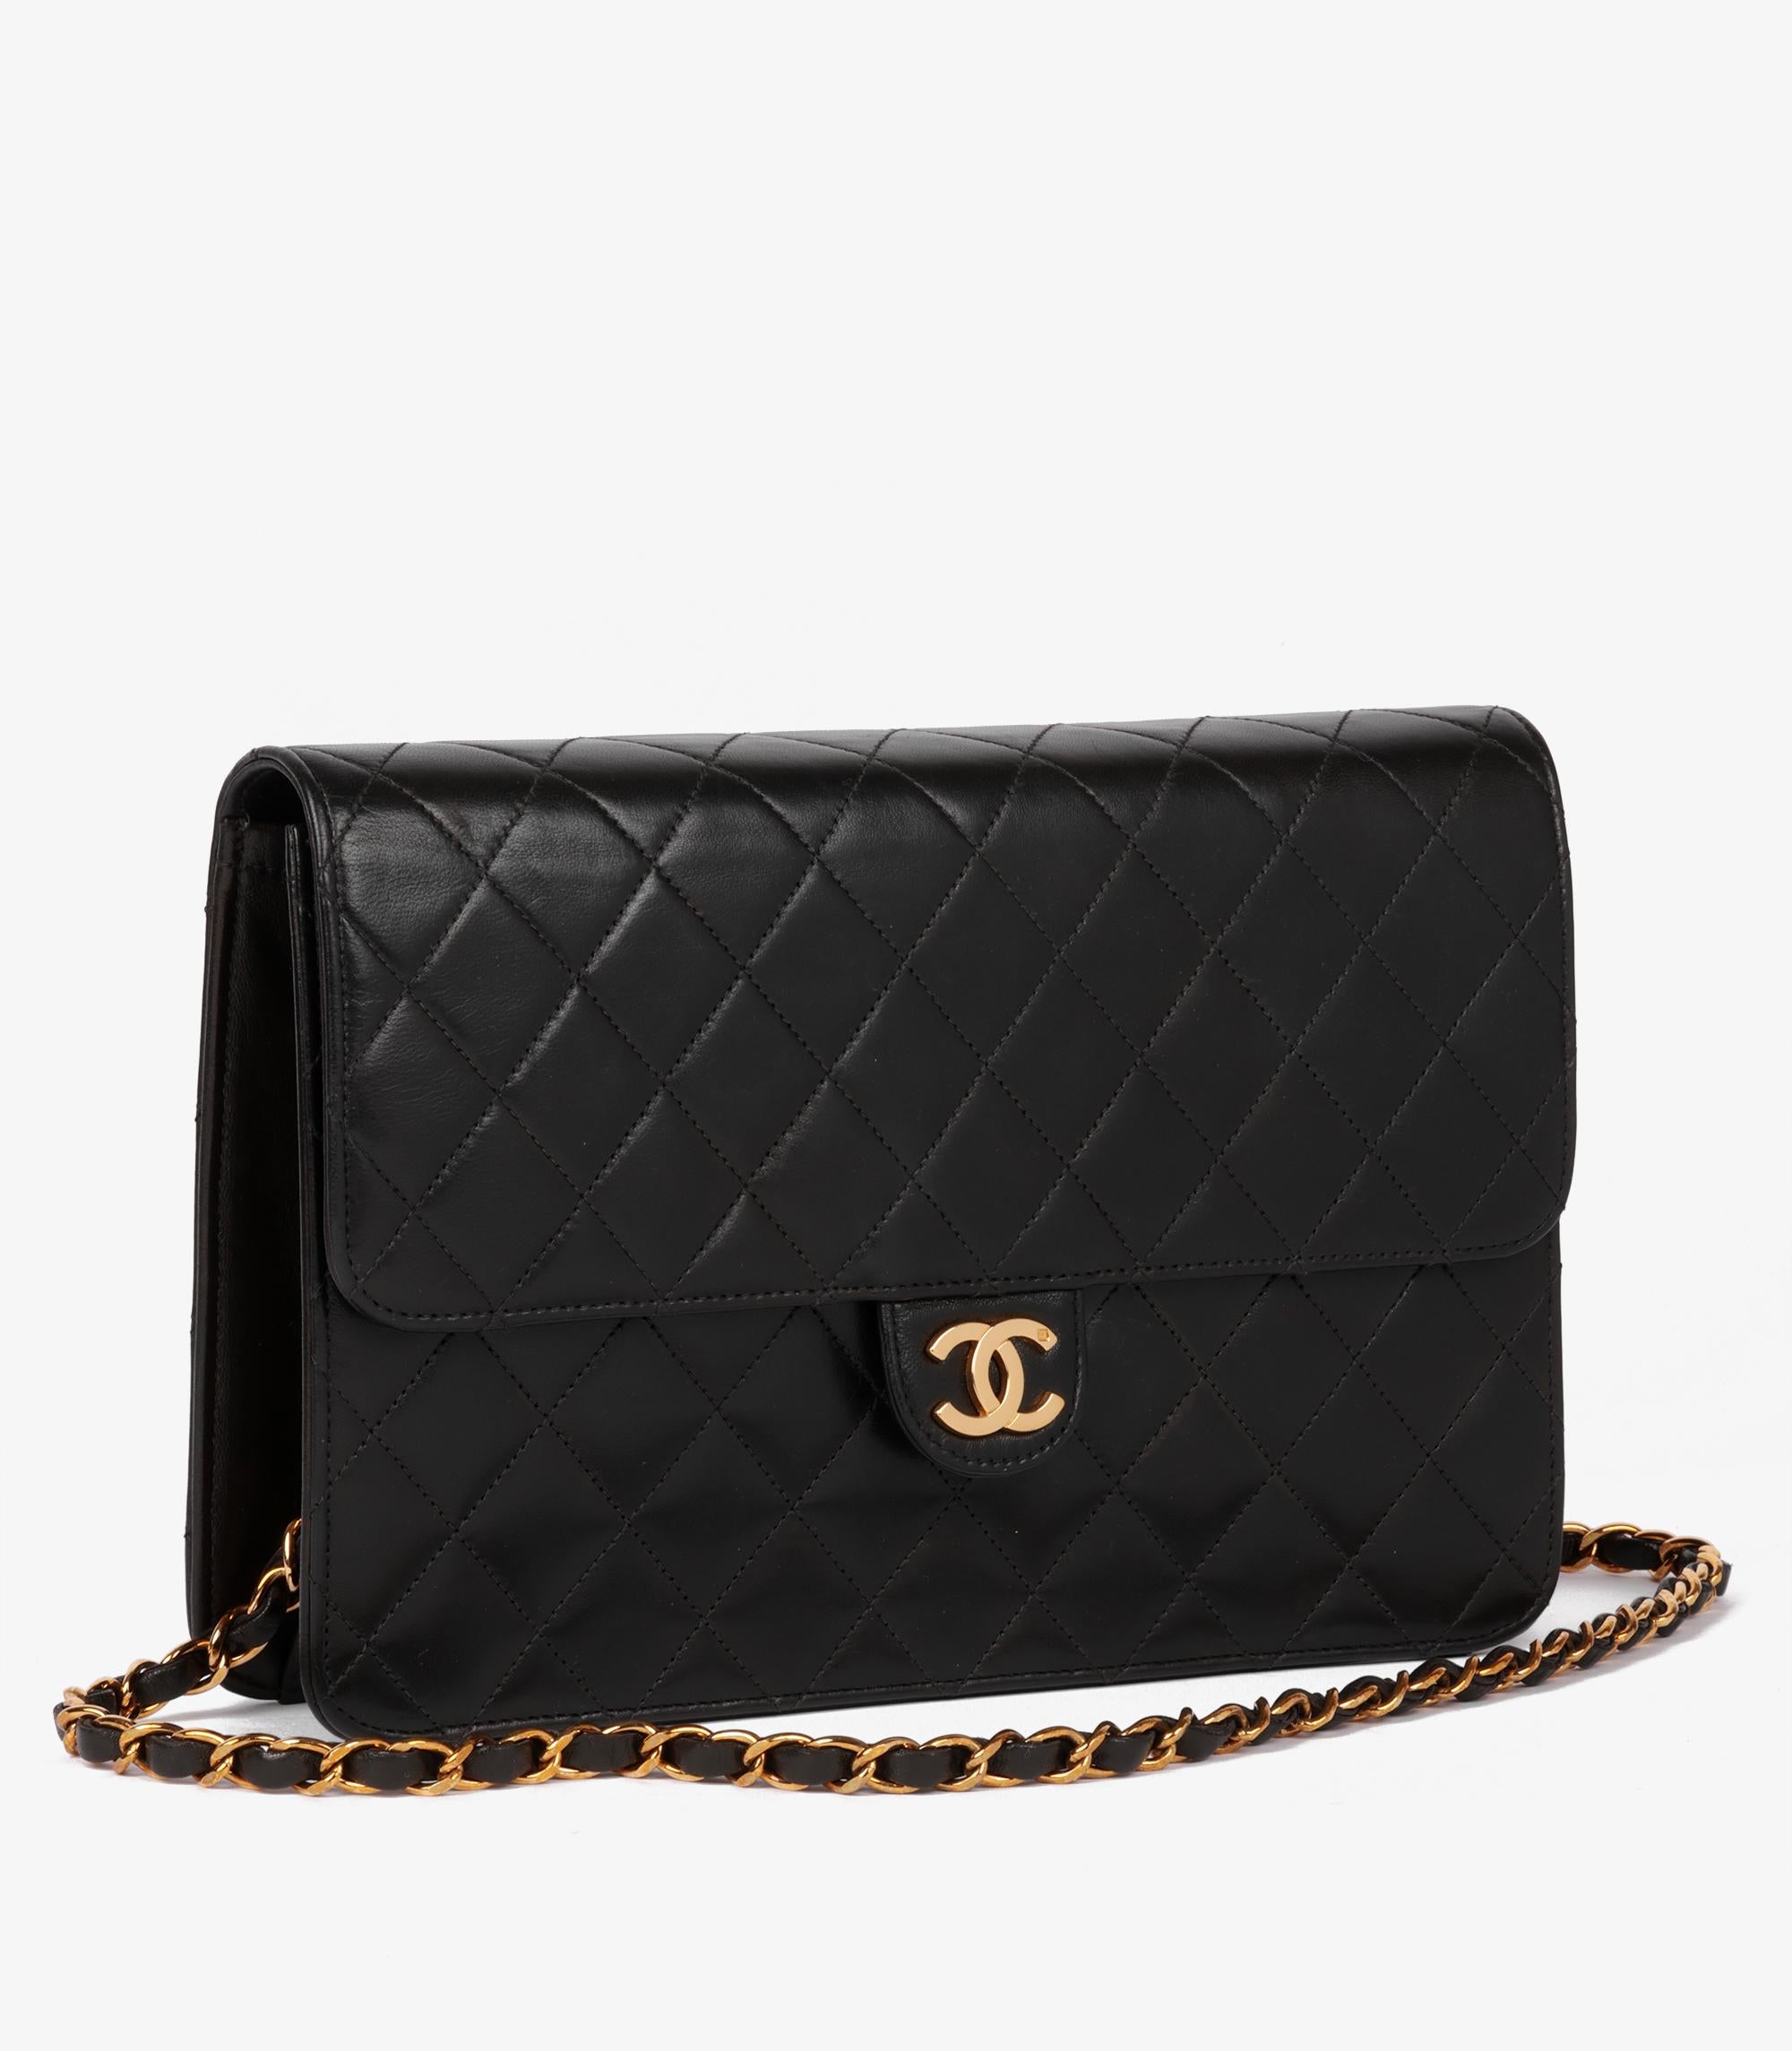 Chanel Black Quilted Lambskin Vintage Medium Classic Single Flap Bag

Brand- Chanel
Model- Medium Classic Single Flap Bag
Product Type- Shoulder
Serial Number- 51*****
Age- Circa 1997
Accompanied By- Chanel Dust Bag, Authenticity Card
Colour-